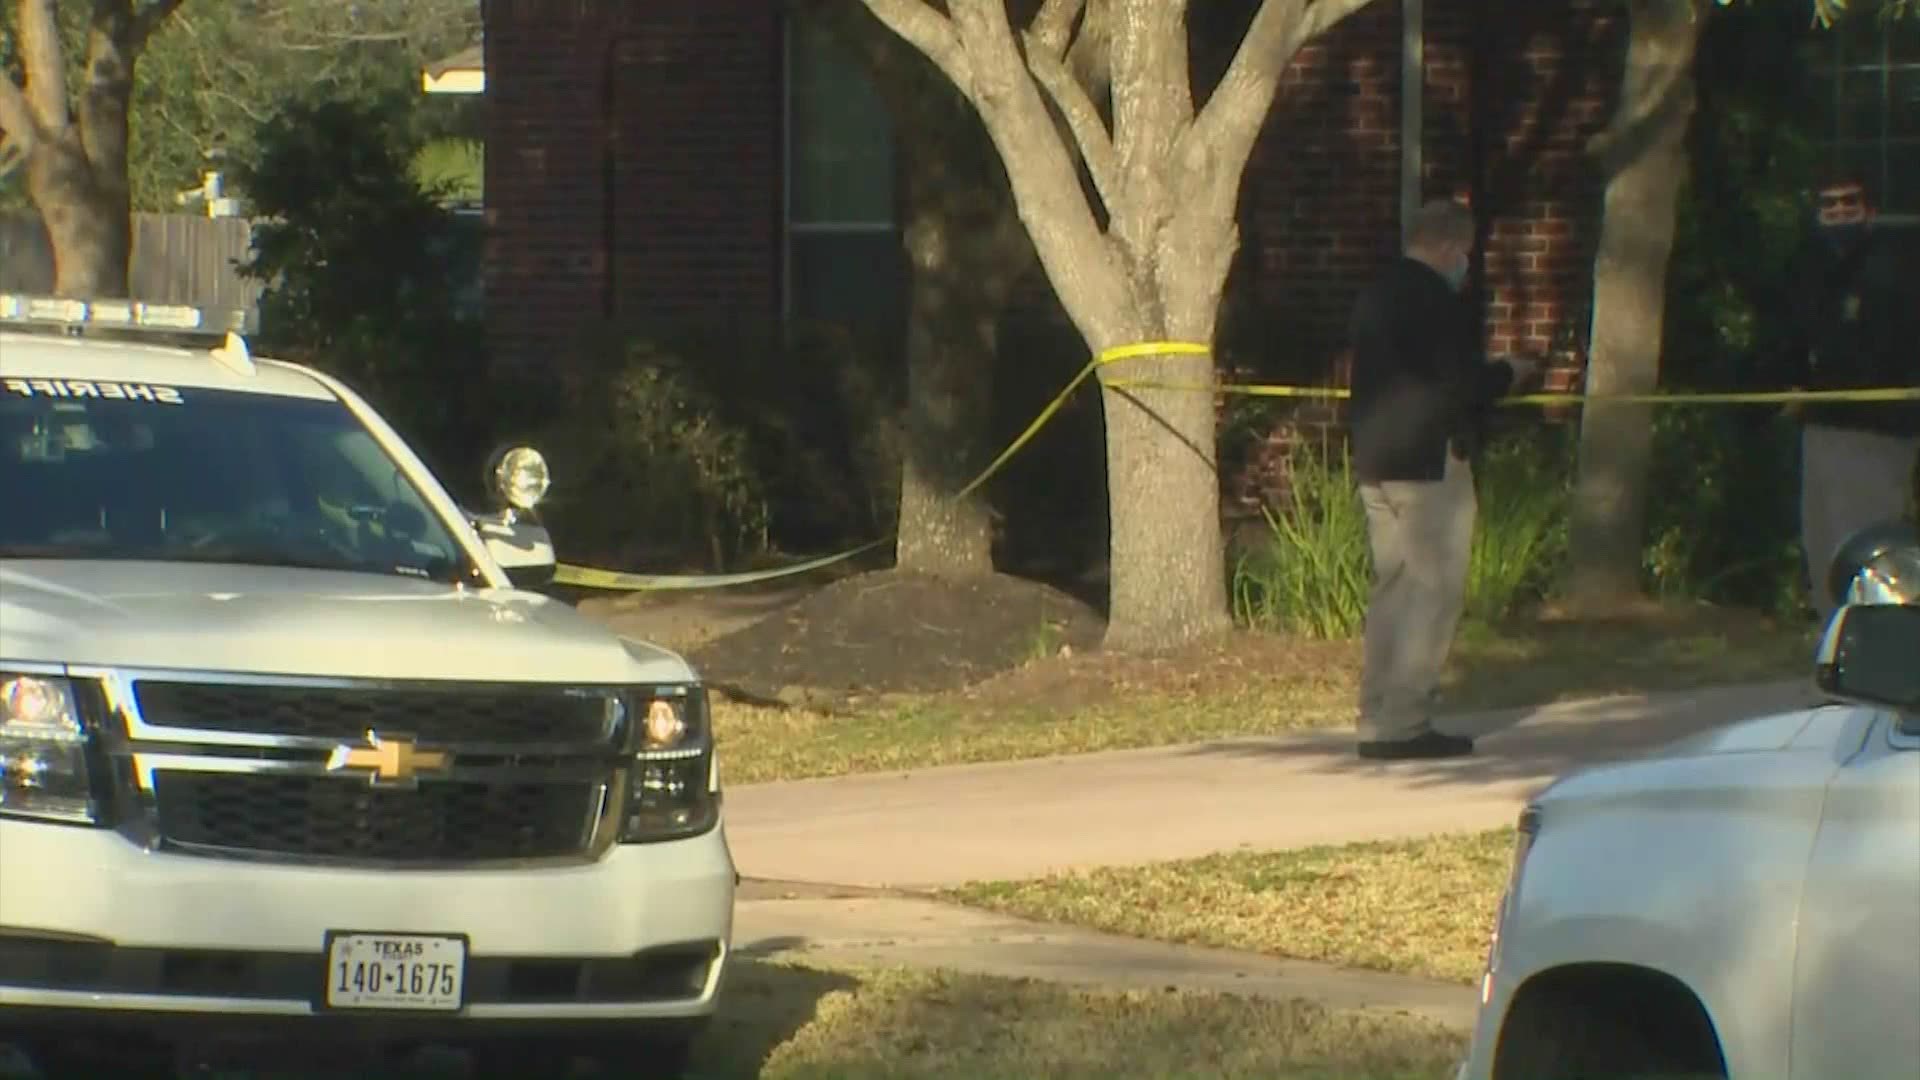 Fort Bend County deputies said a son shot and killed his father Thursday morning. Deputies said the son suffers from mental illness.